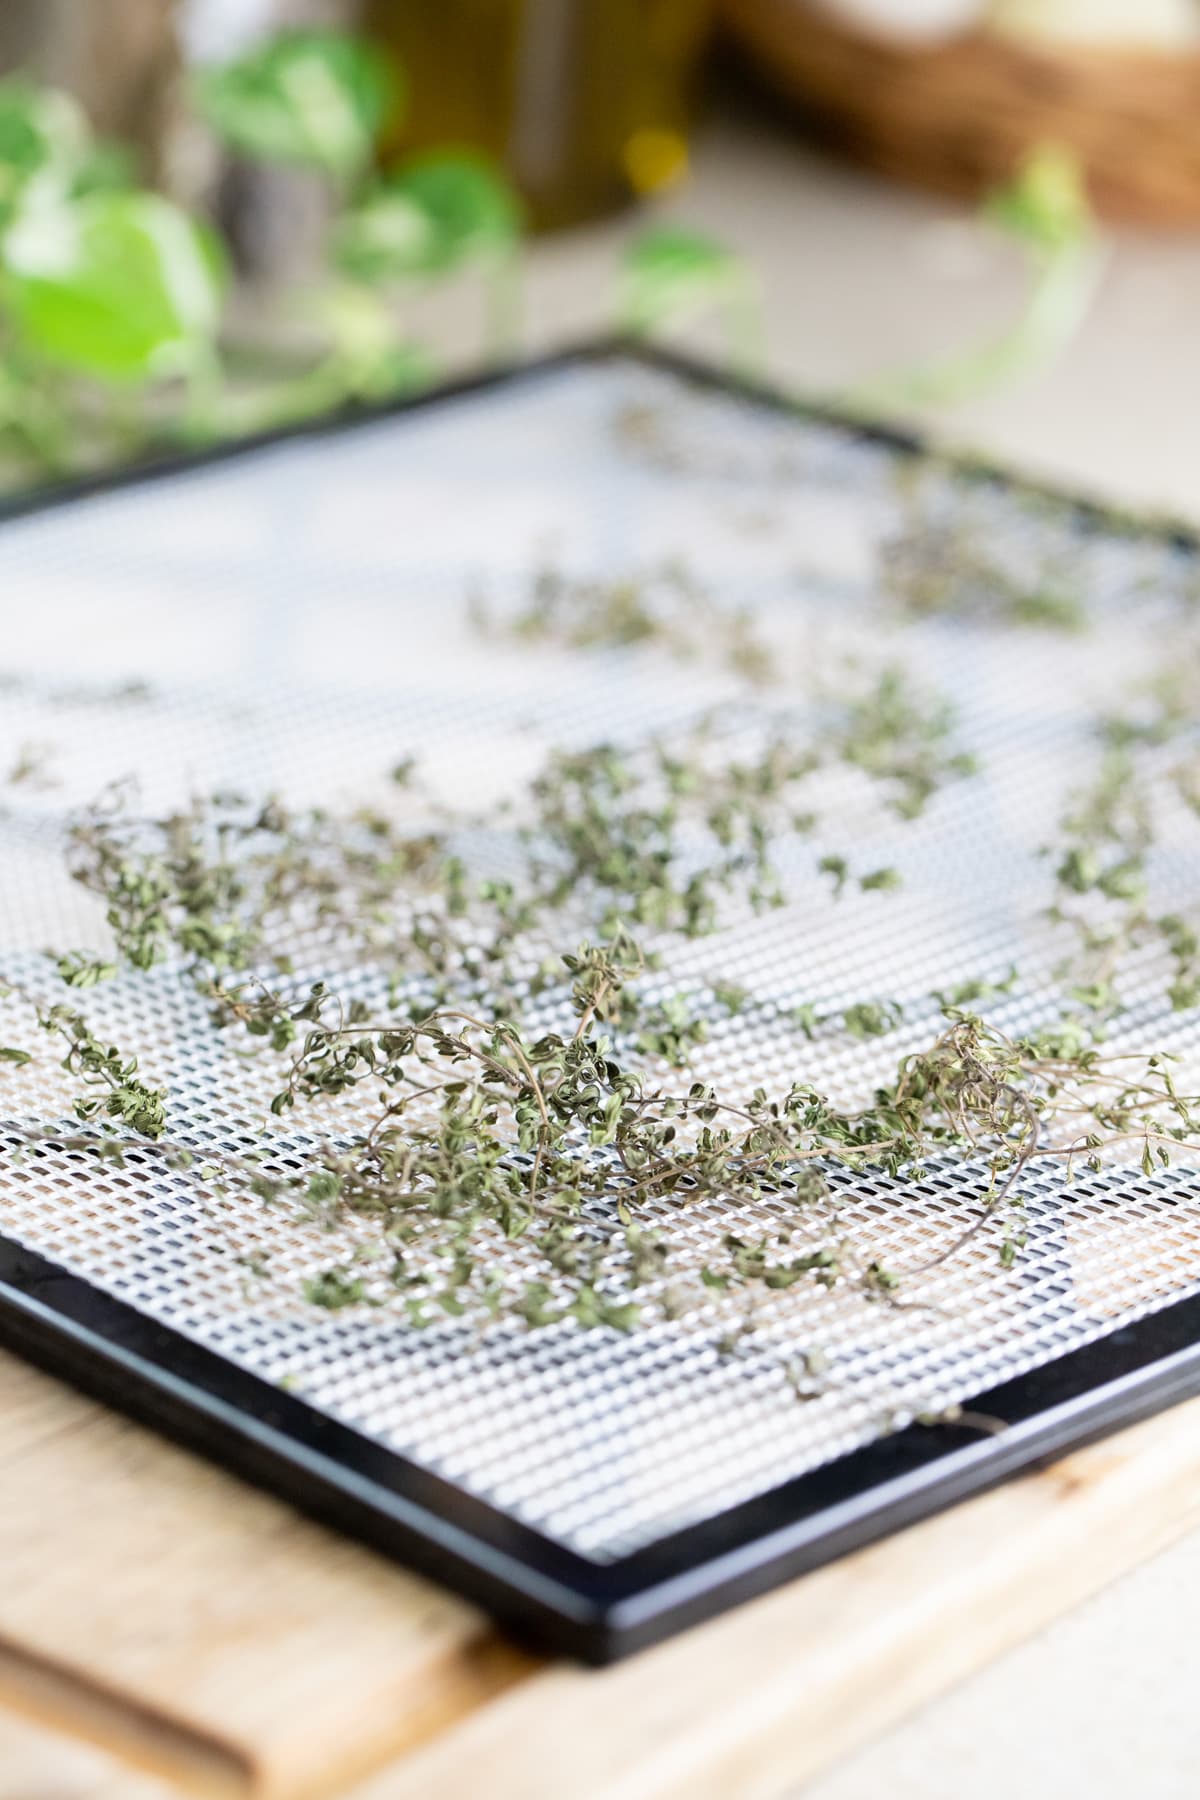 thyme after dehydrating in the dehydrator